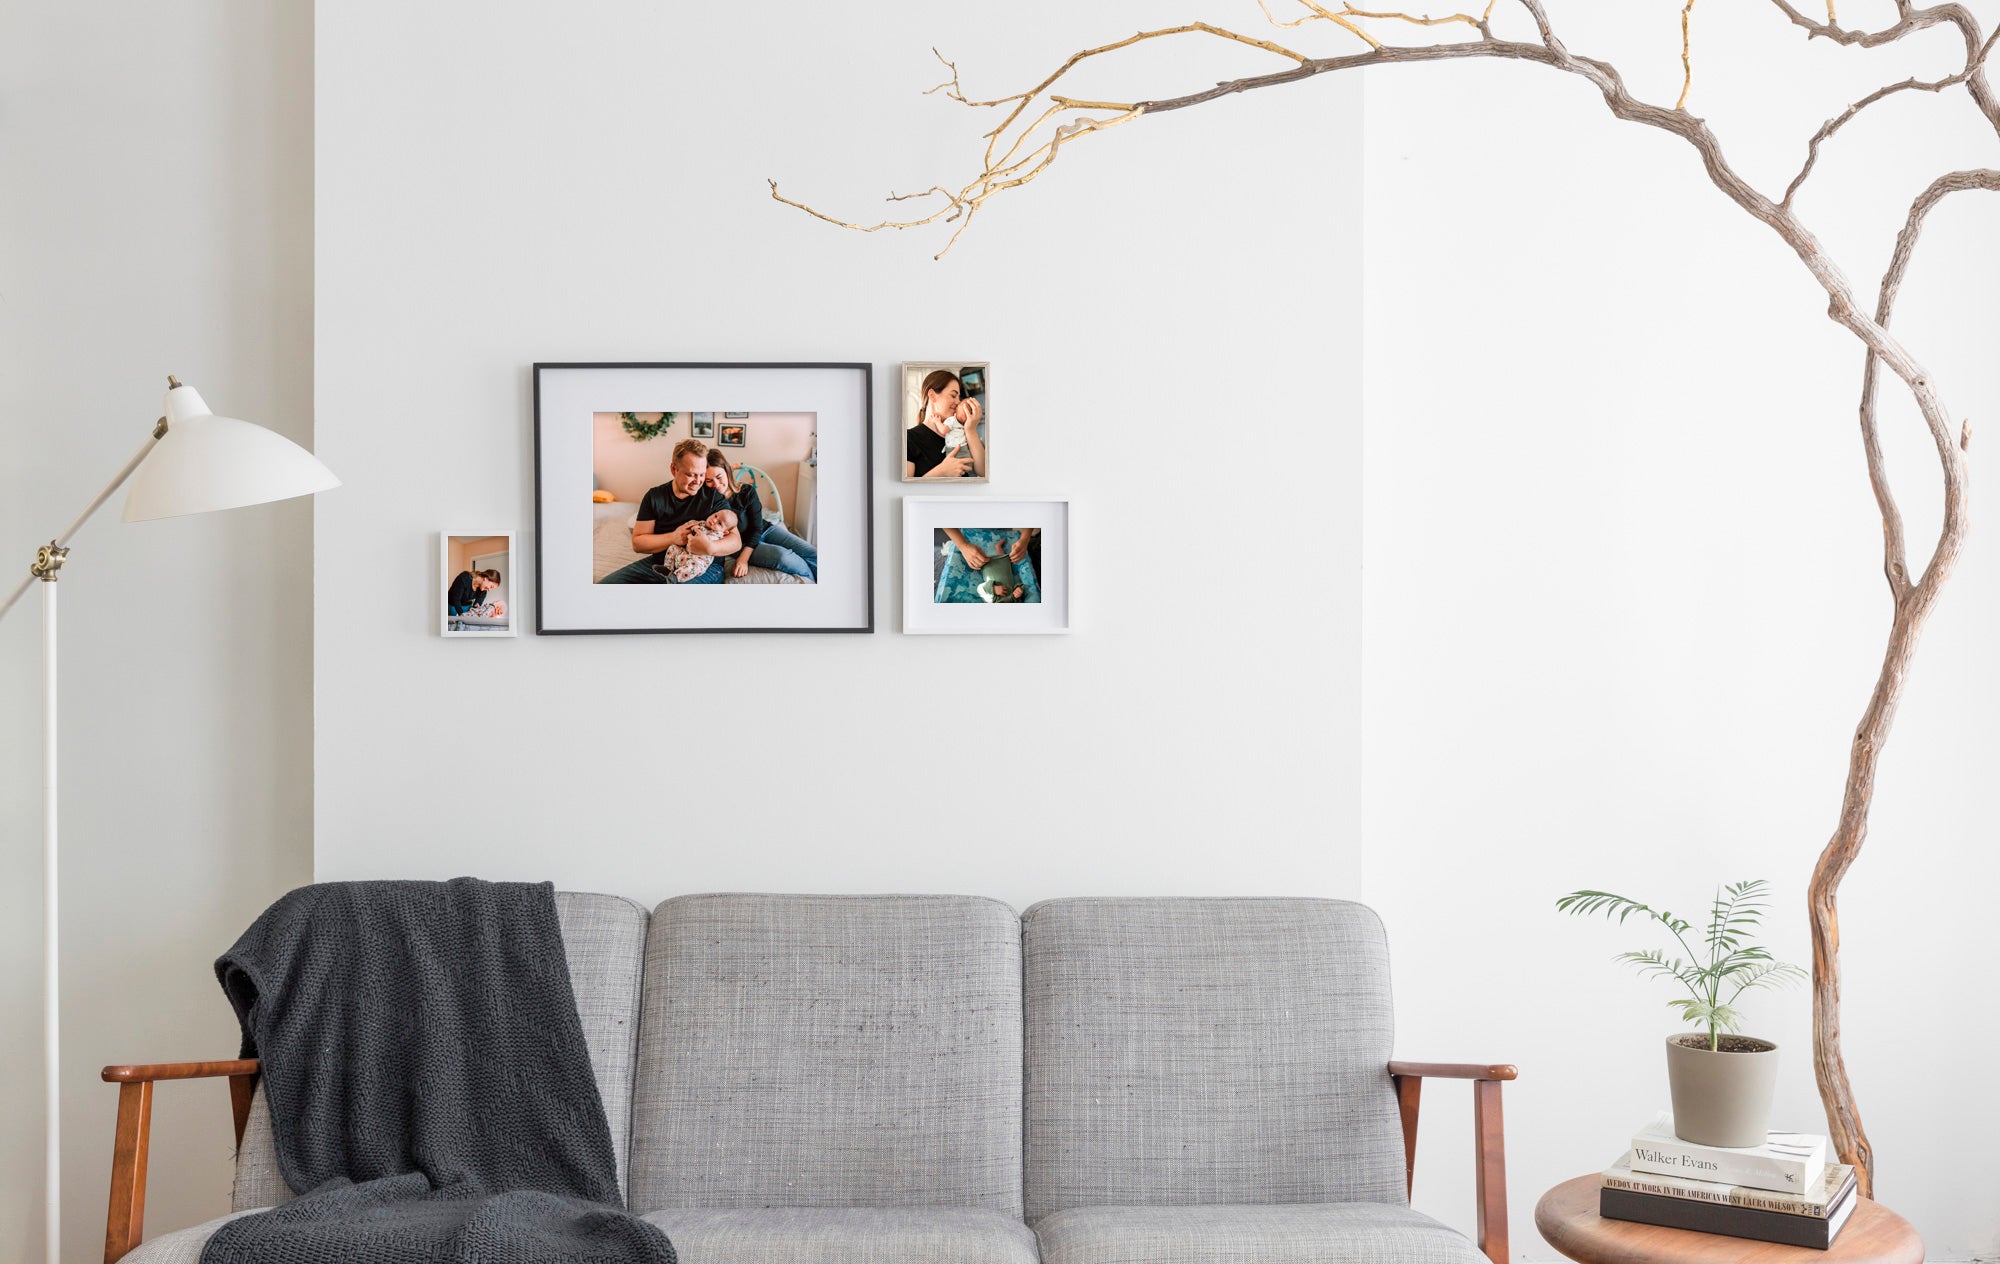 Gallery style wall frames